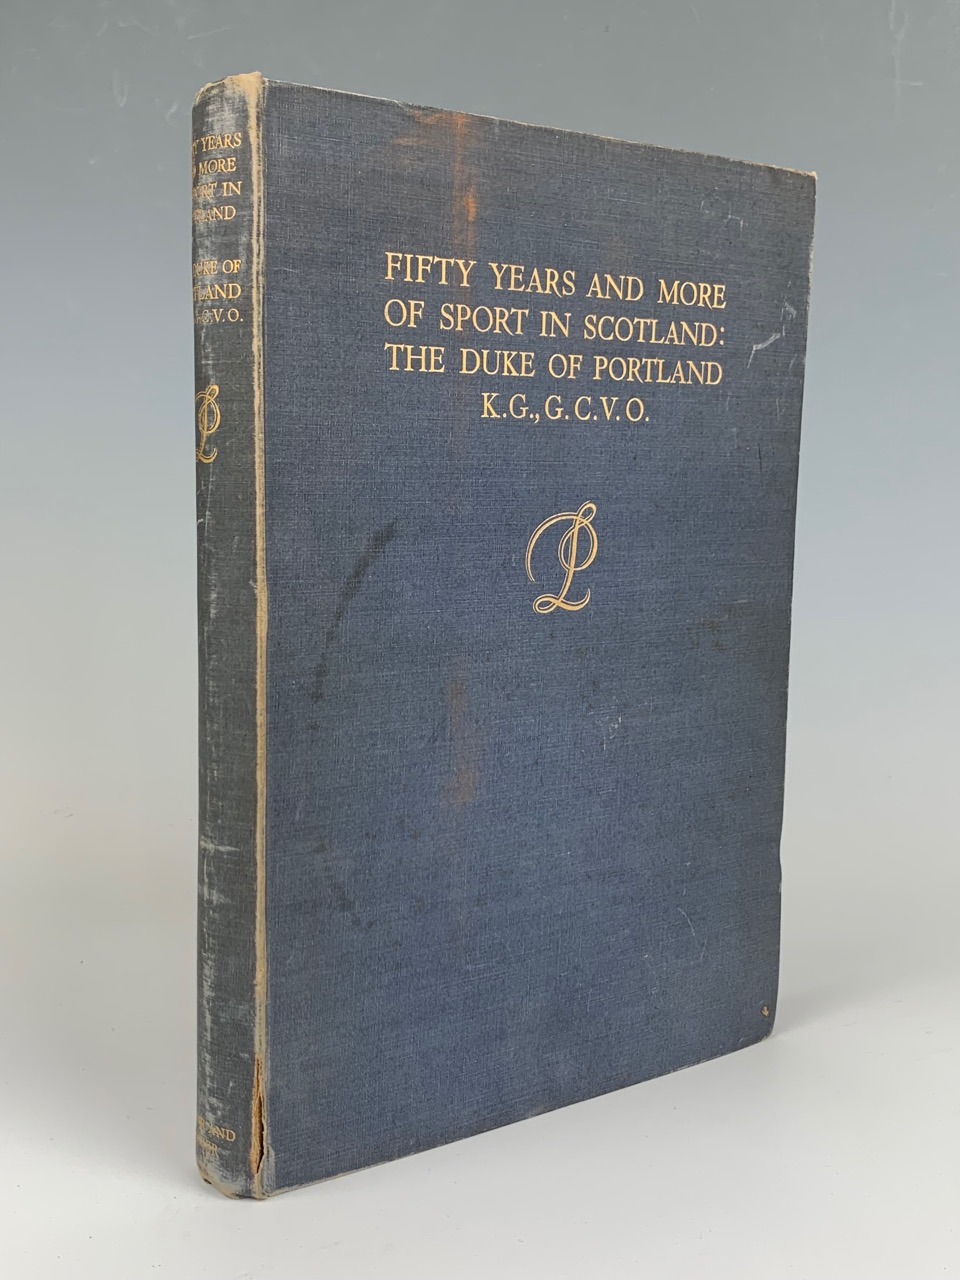 The Duke of Portland, "Fifty Years and More of Sport in Scotland. Deer Stalking, Salmon Fishing